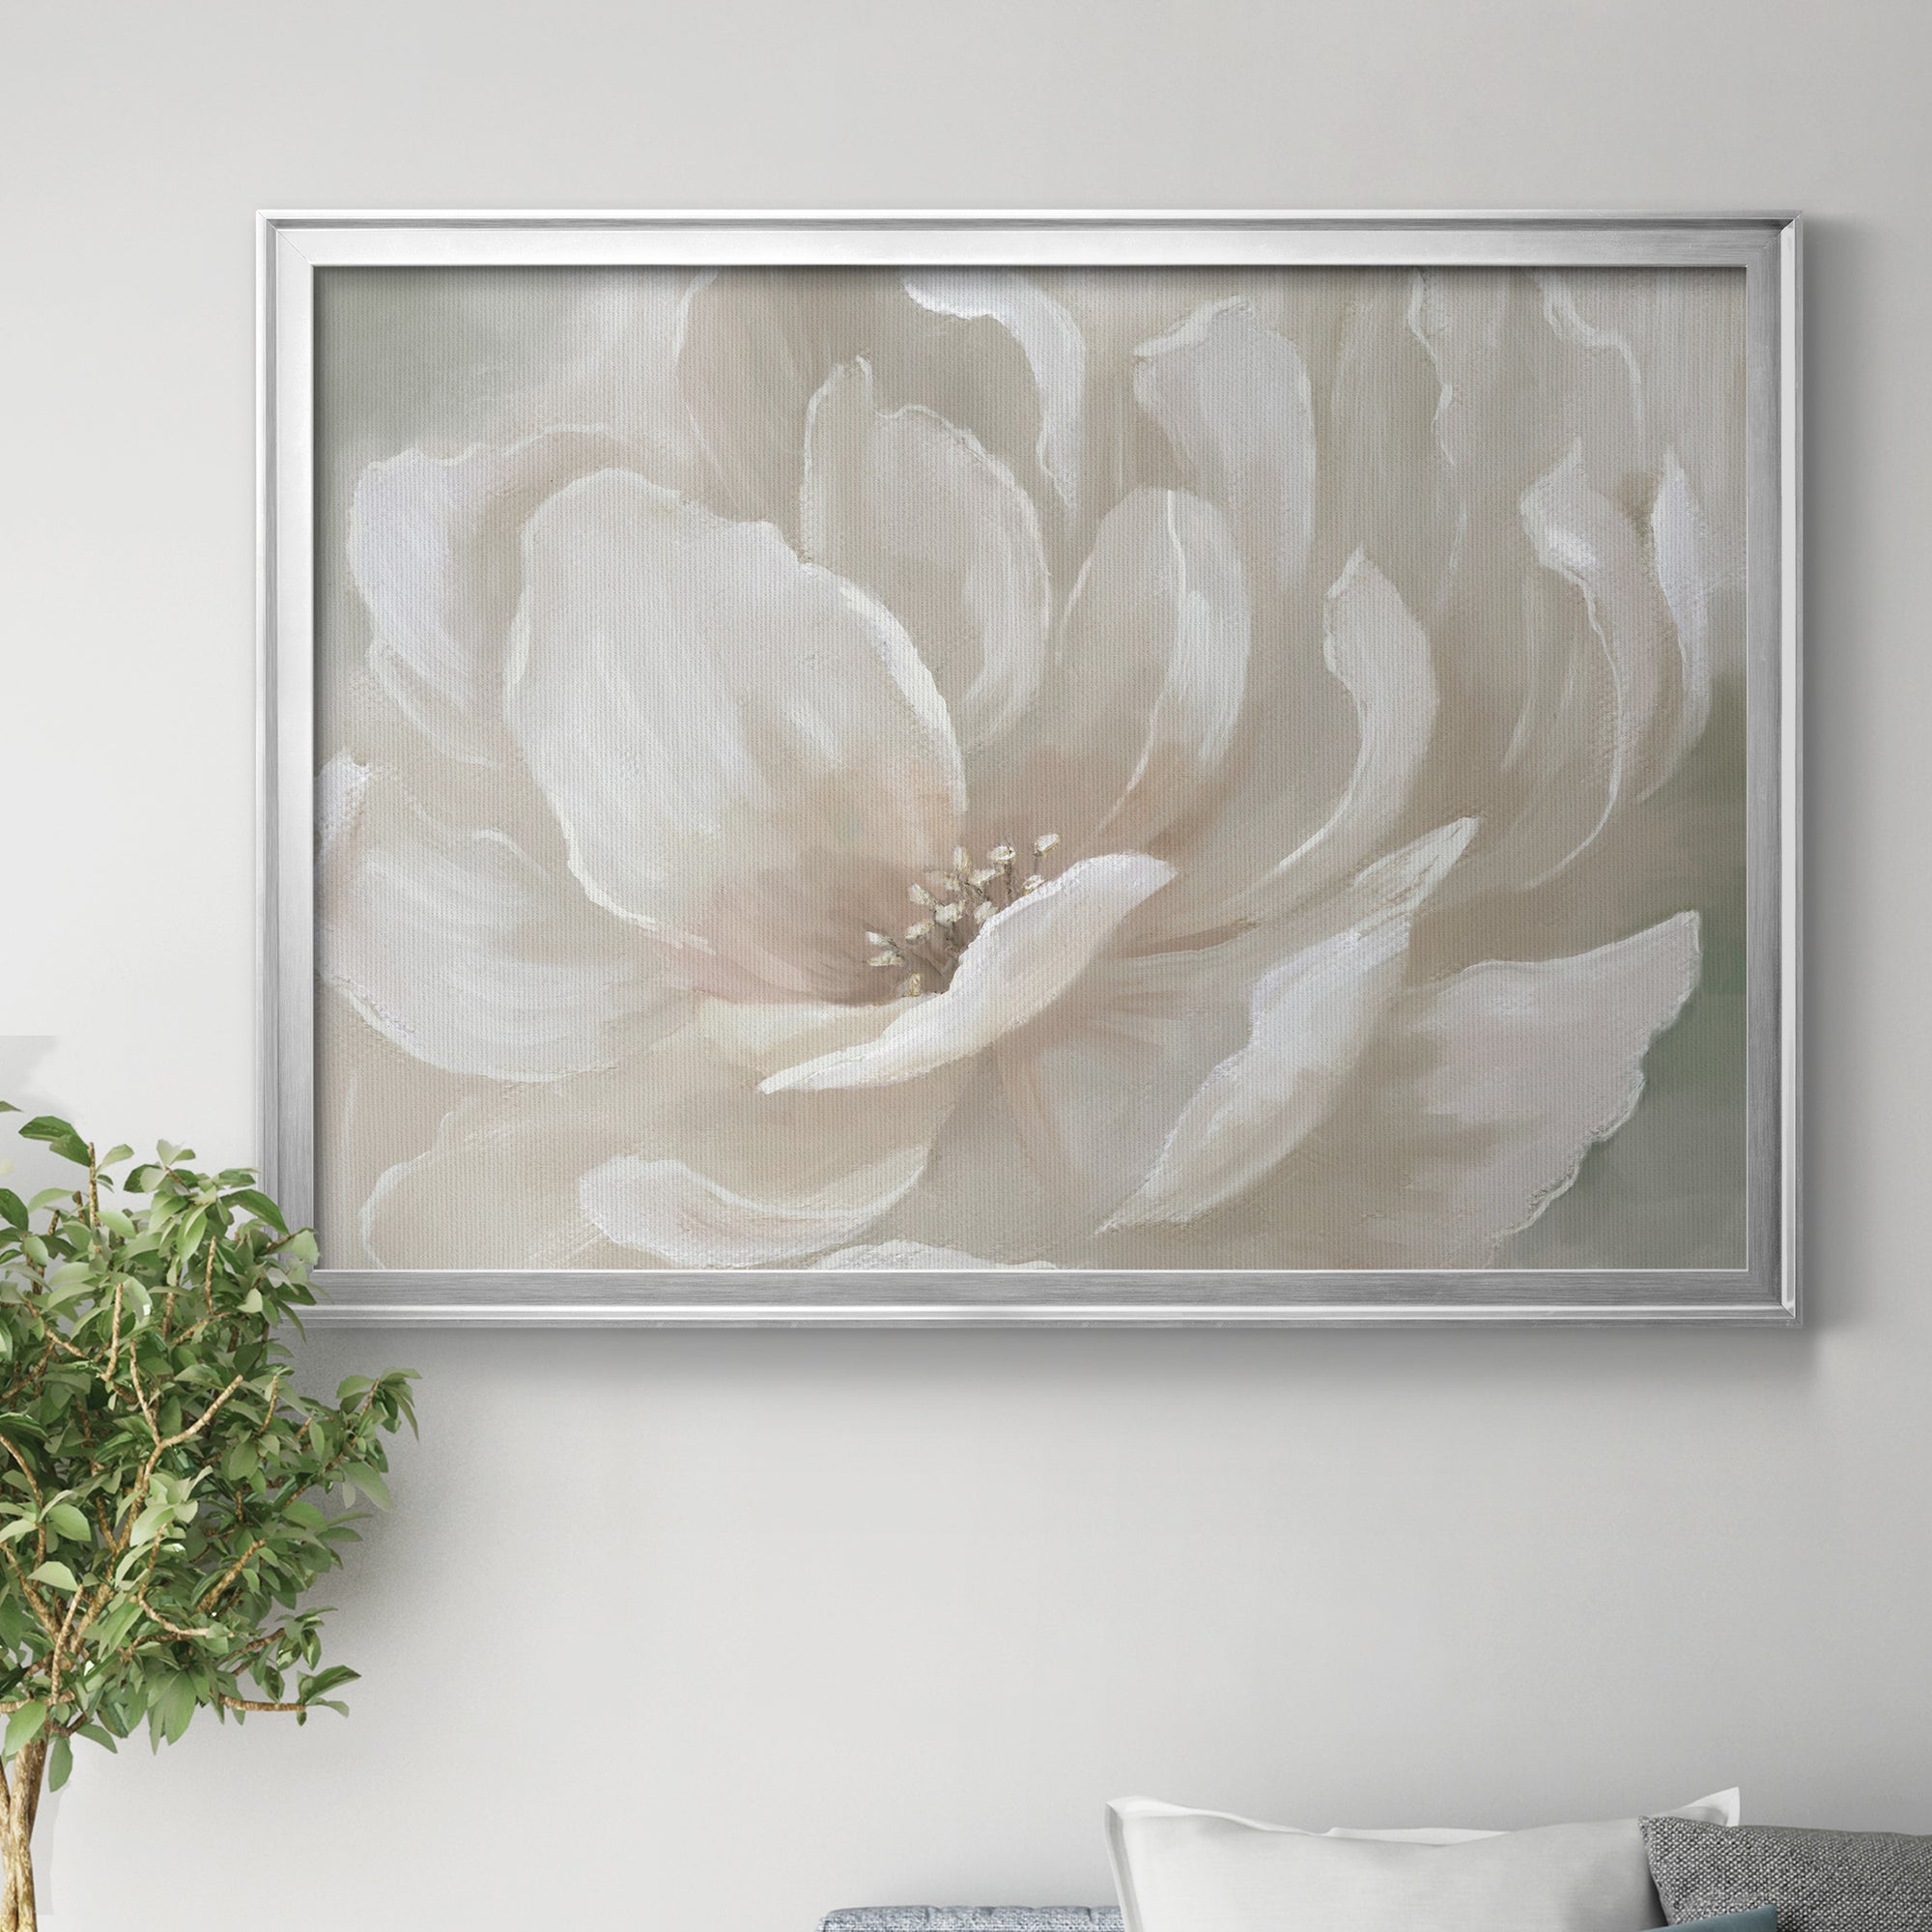 Peach Perfect Premium Classic Framed Canvas - Ready to Hang